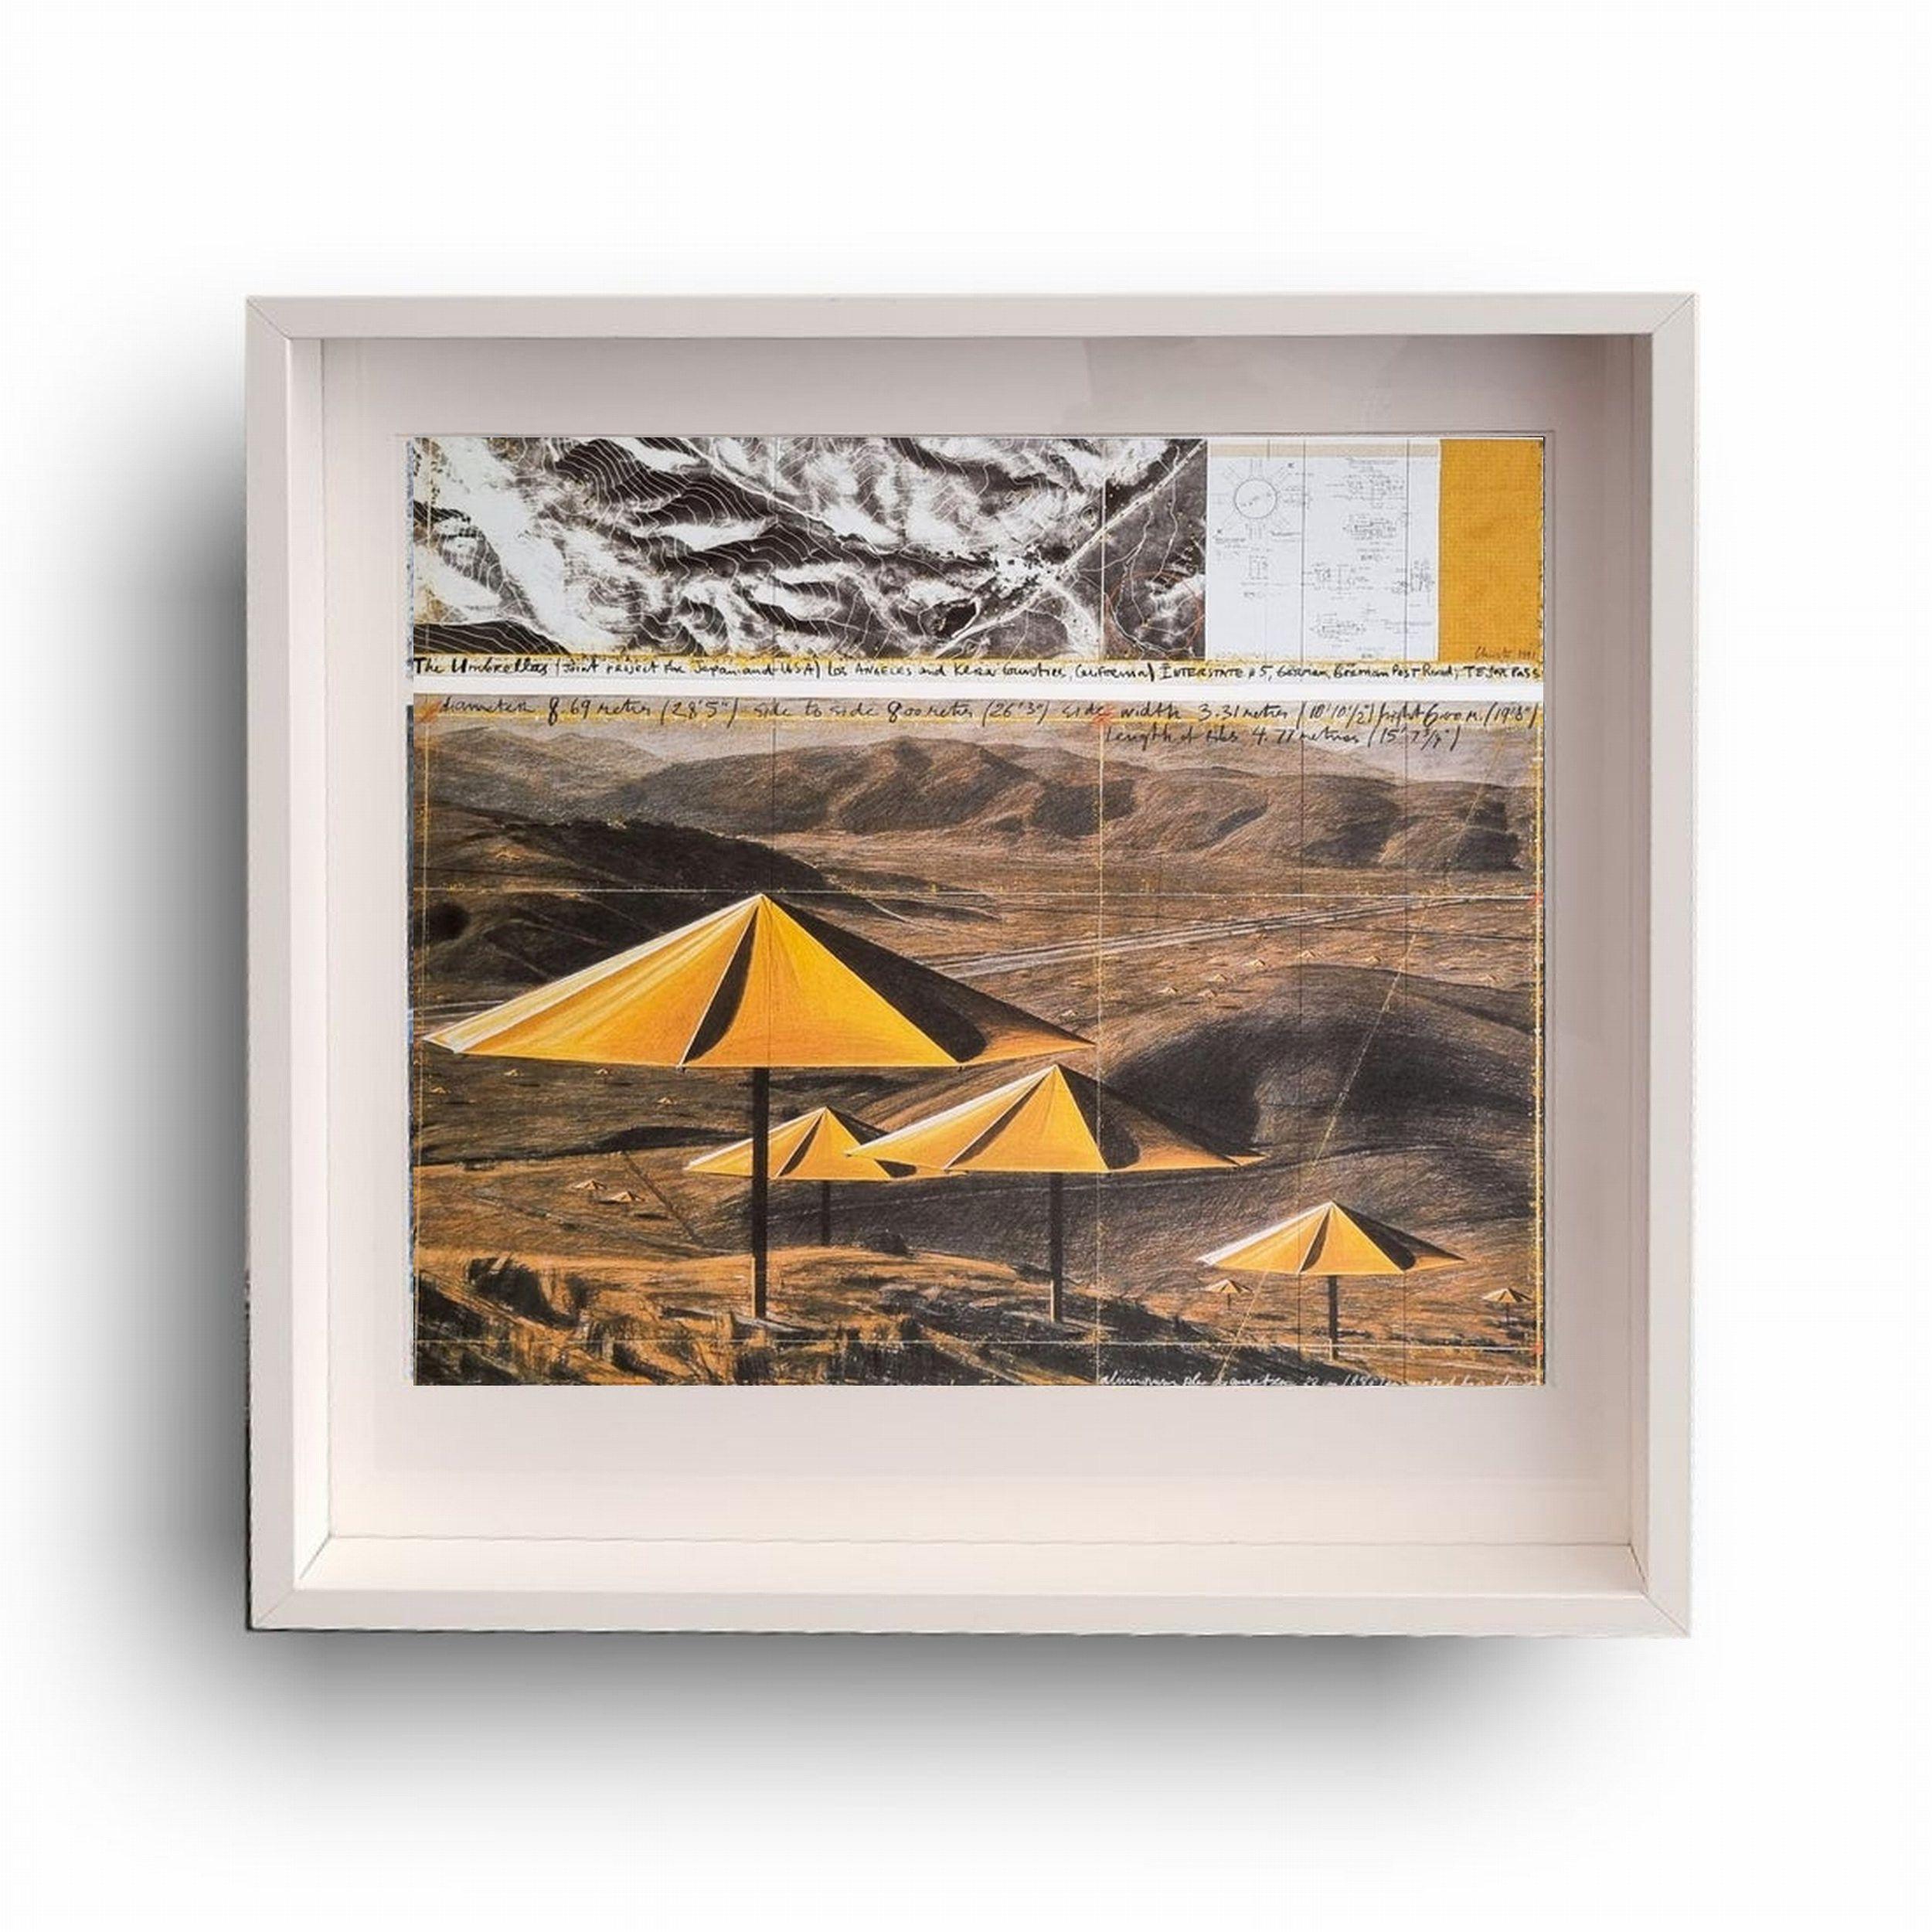 The Umbrellas (Yellow) - Print by Christo and Jeanne-Claude